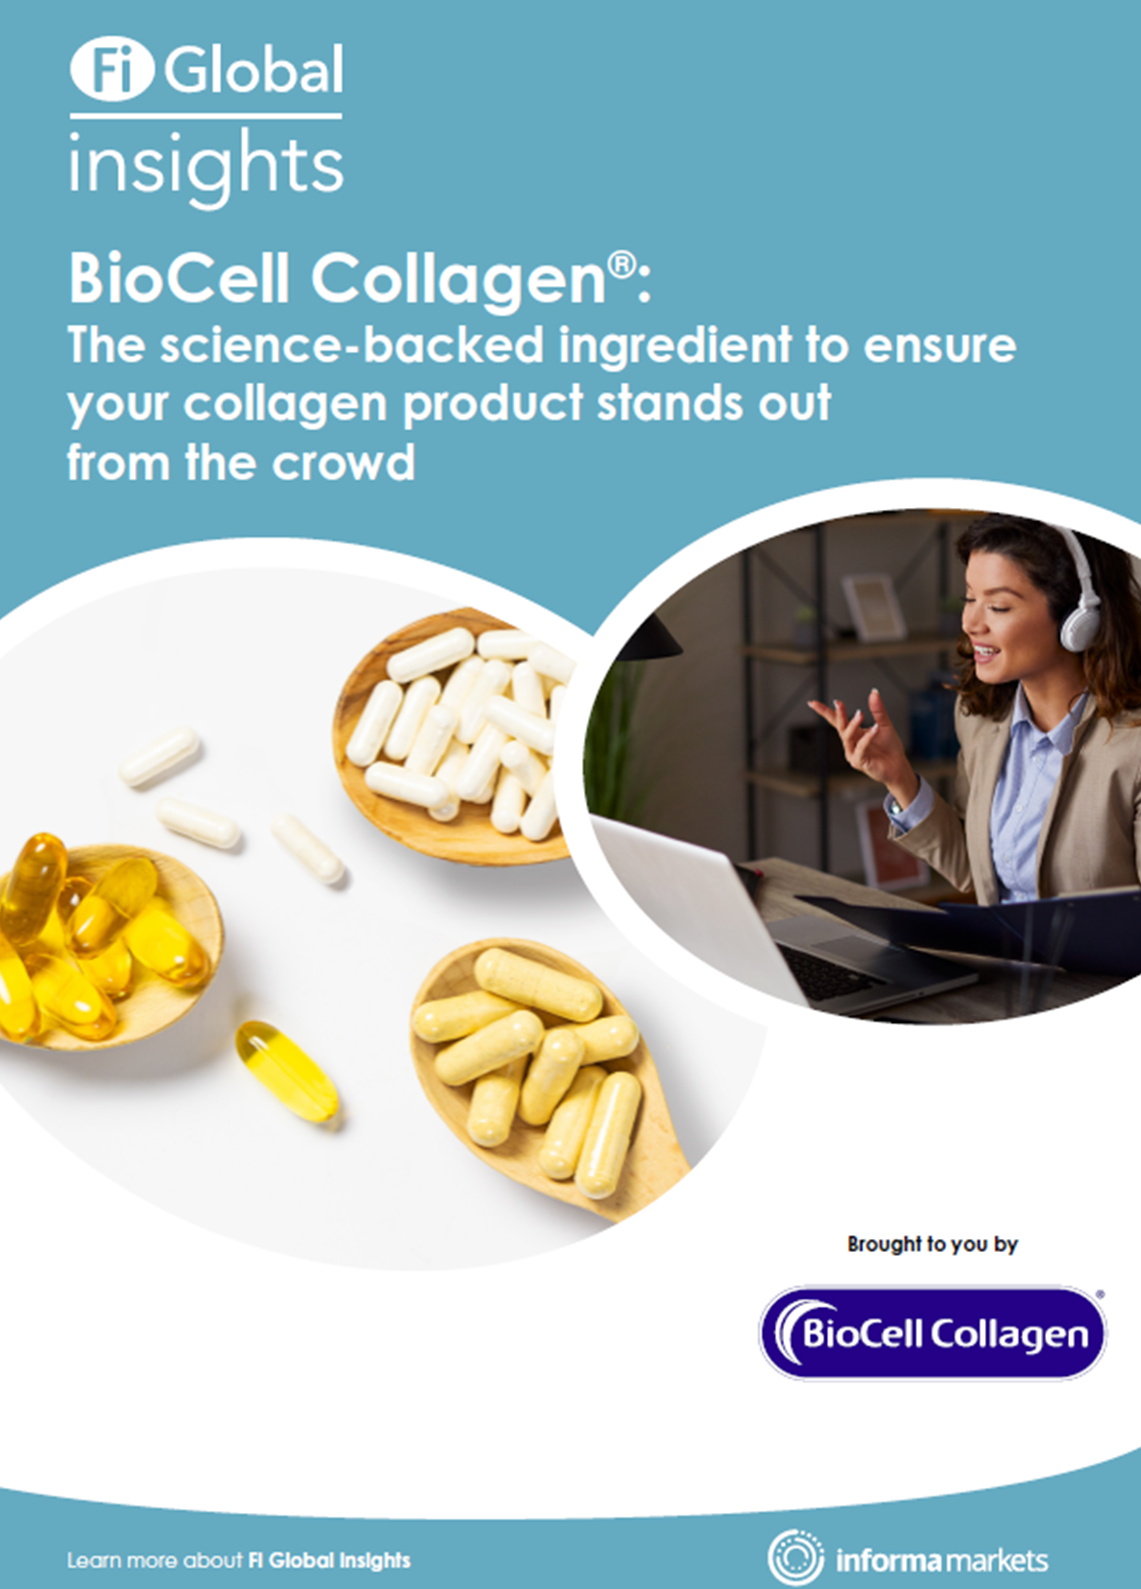 BioCell Collagen®: The science-backed ingredient to ensure your collagen product stands out from the crowd